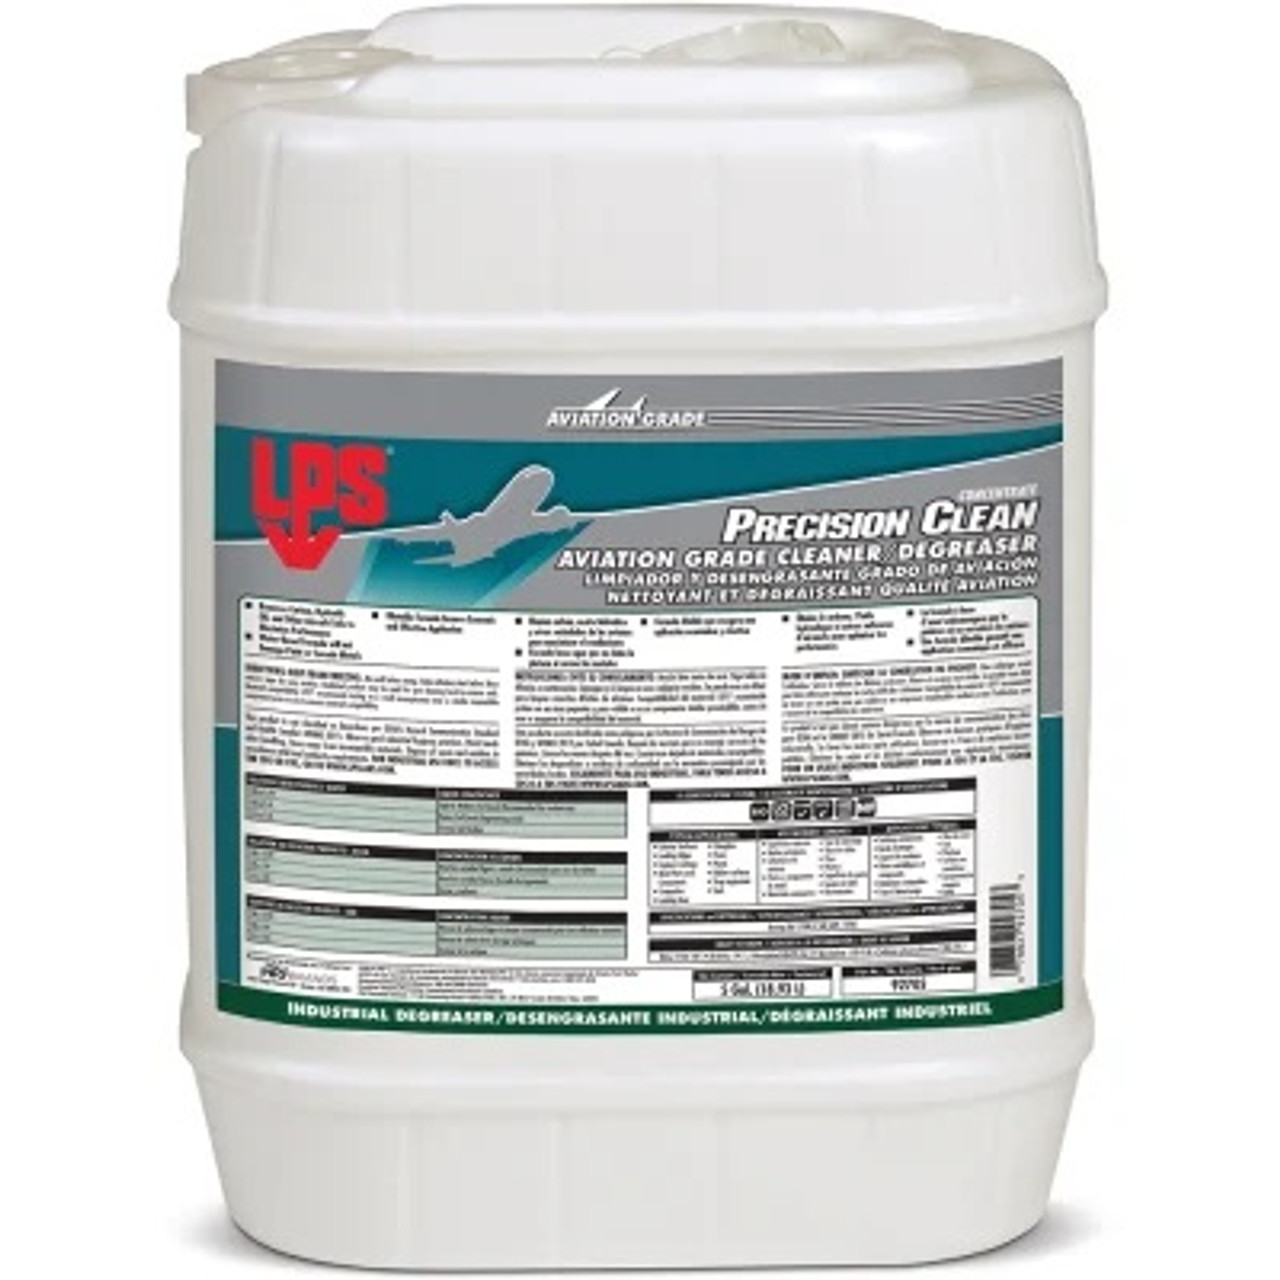 LPS® Precision Clean Aviation Grade Cleaner/Degreaser - 5 Gallon Pail - SkyGeek